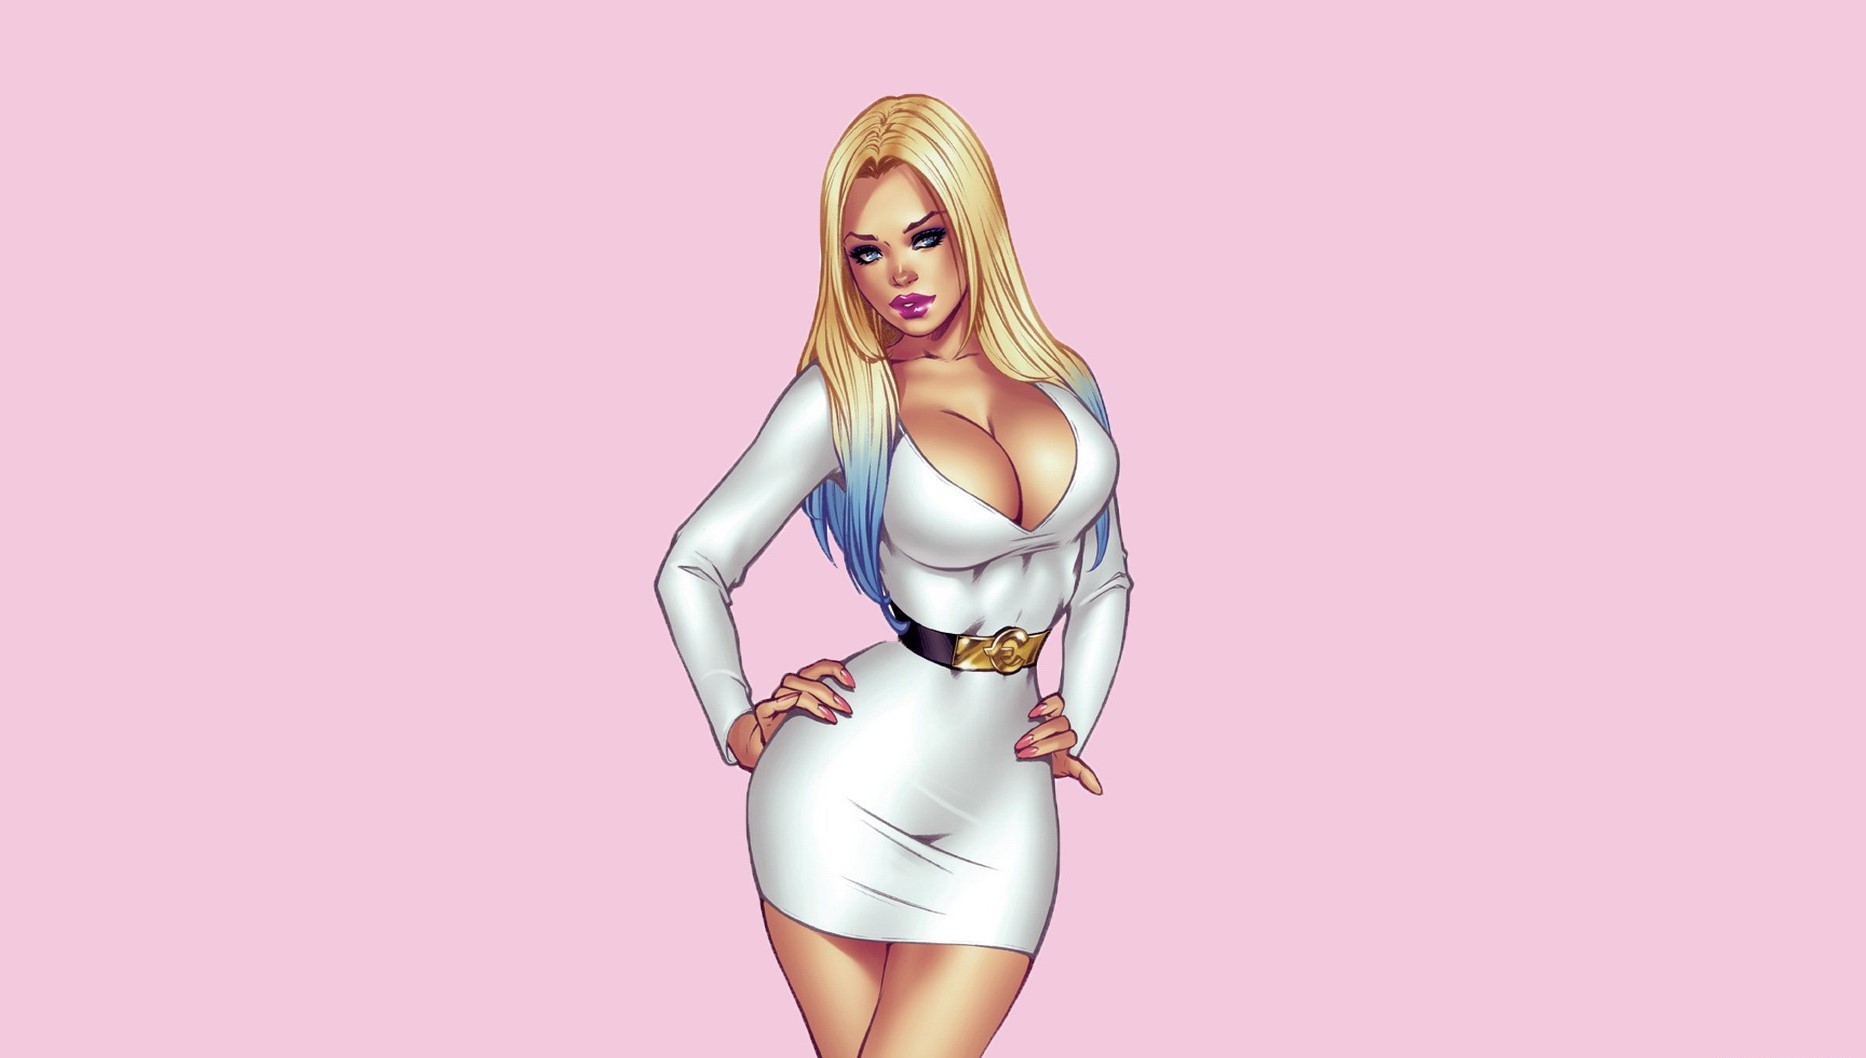 General 1866x1058 artwork women big boobs Elias Chatzoudis dress looking at viewer simple background hands on hips curvy white dress white clothing pink background blonde long hair painted nails pink nails purple lipstick